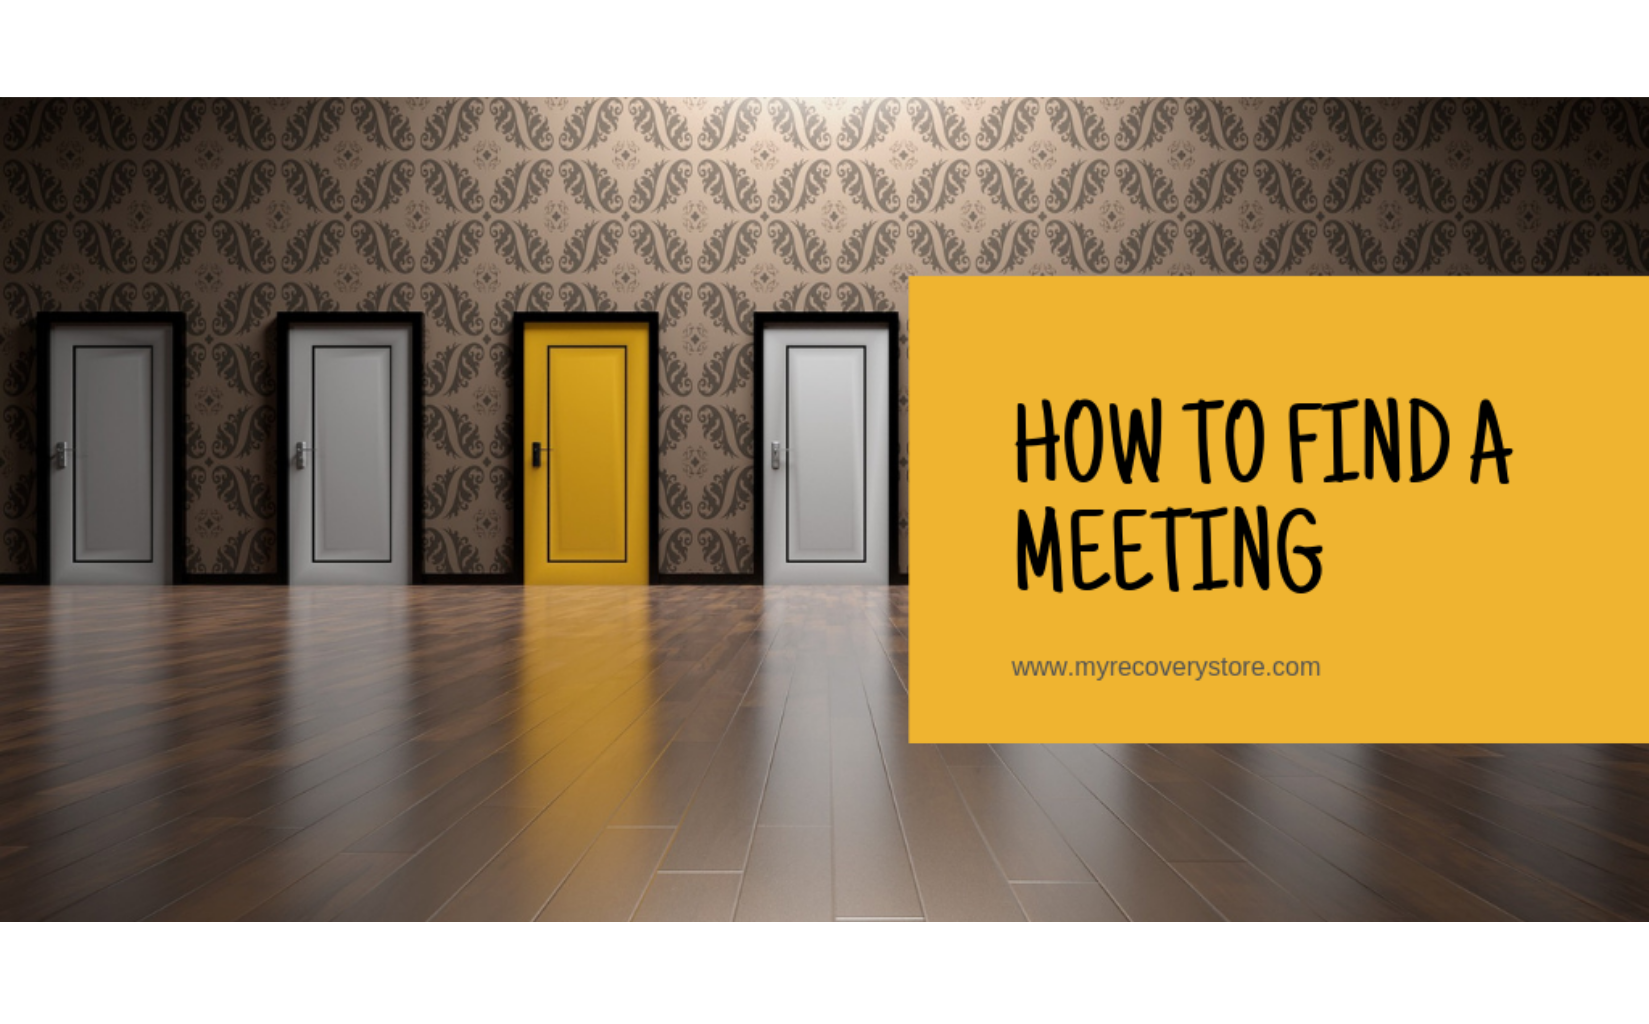 How to Find a Meeting